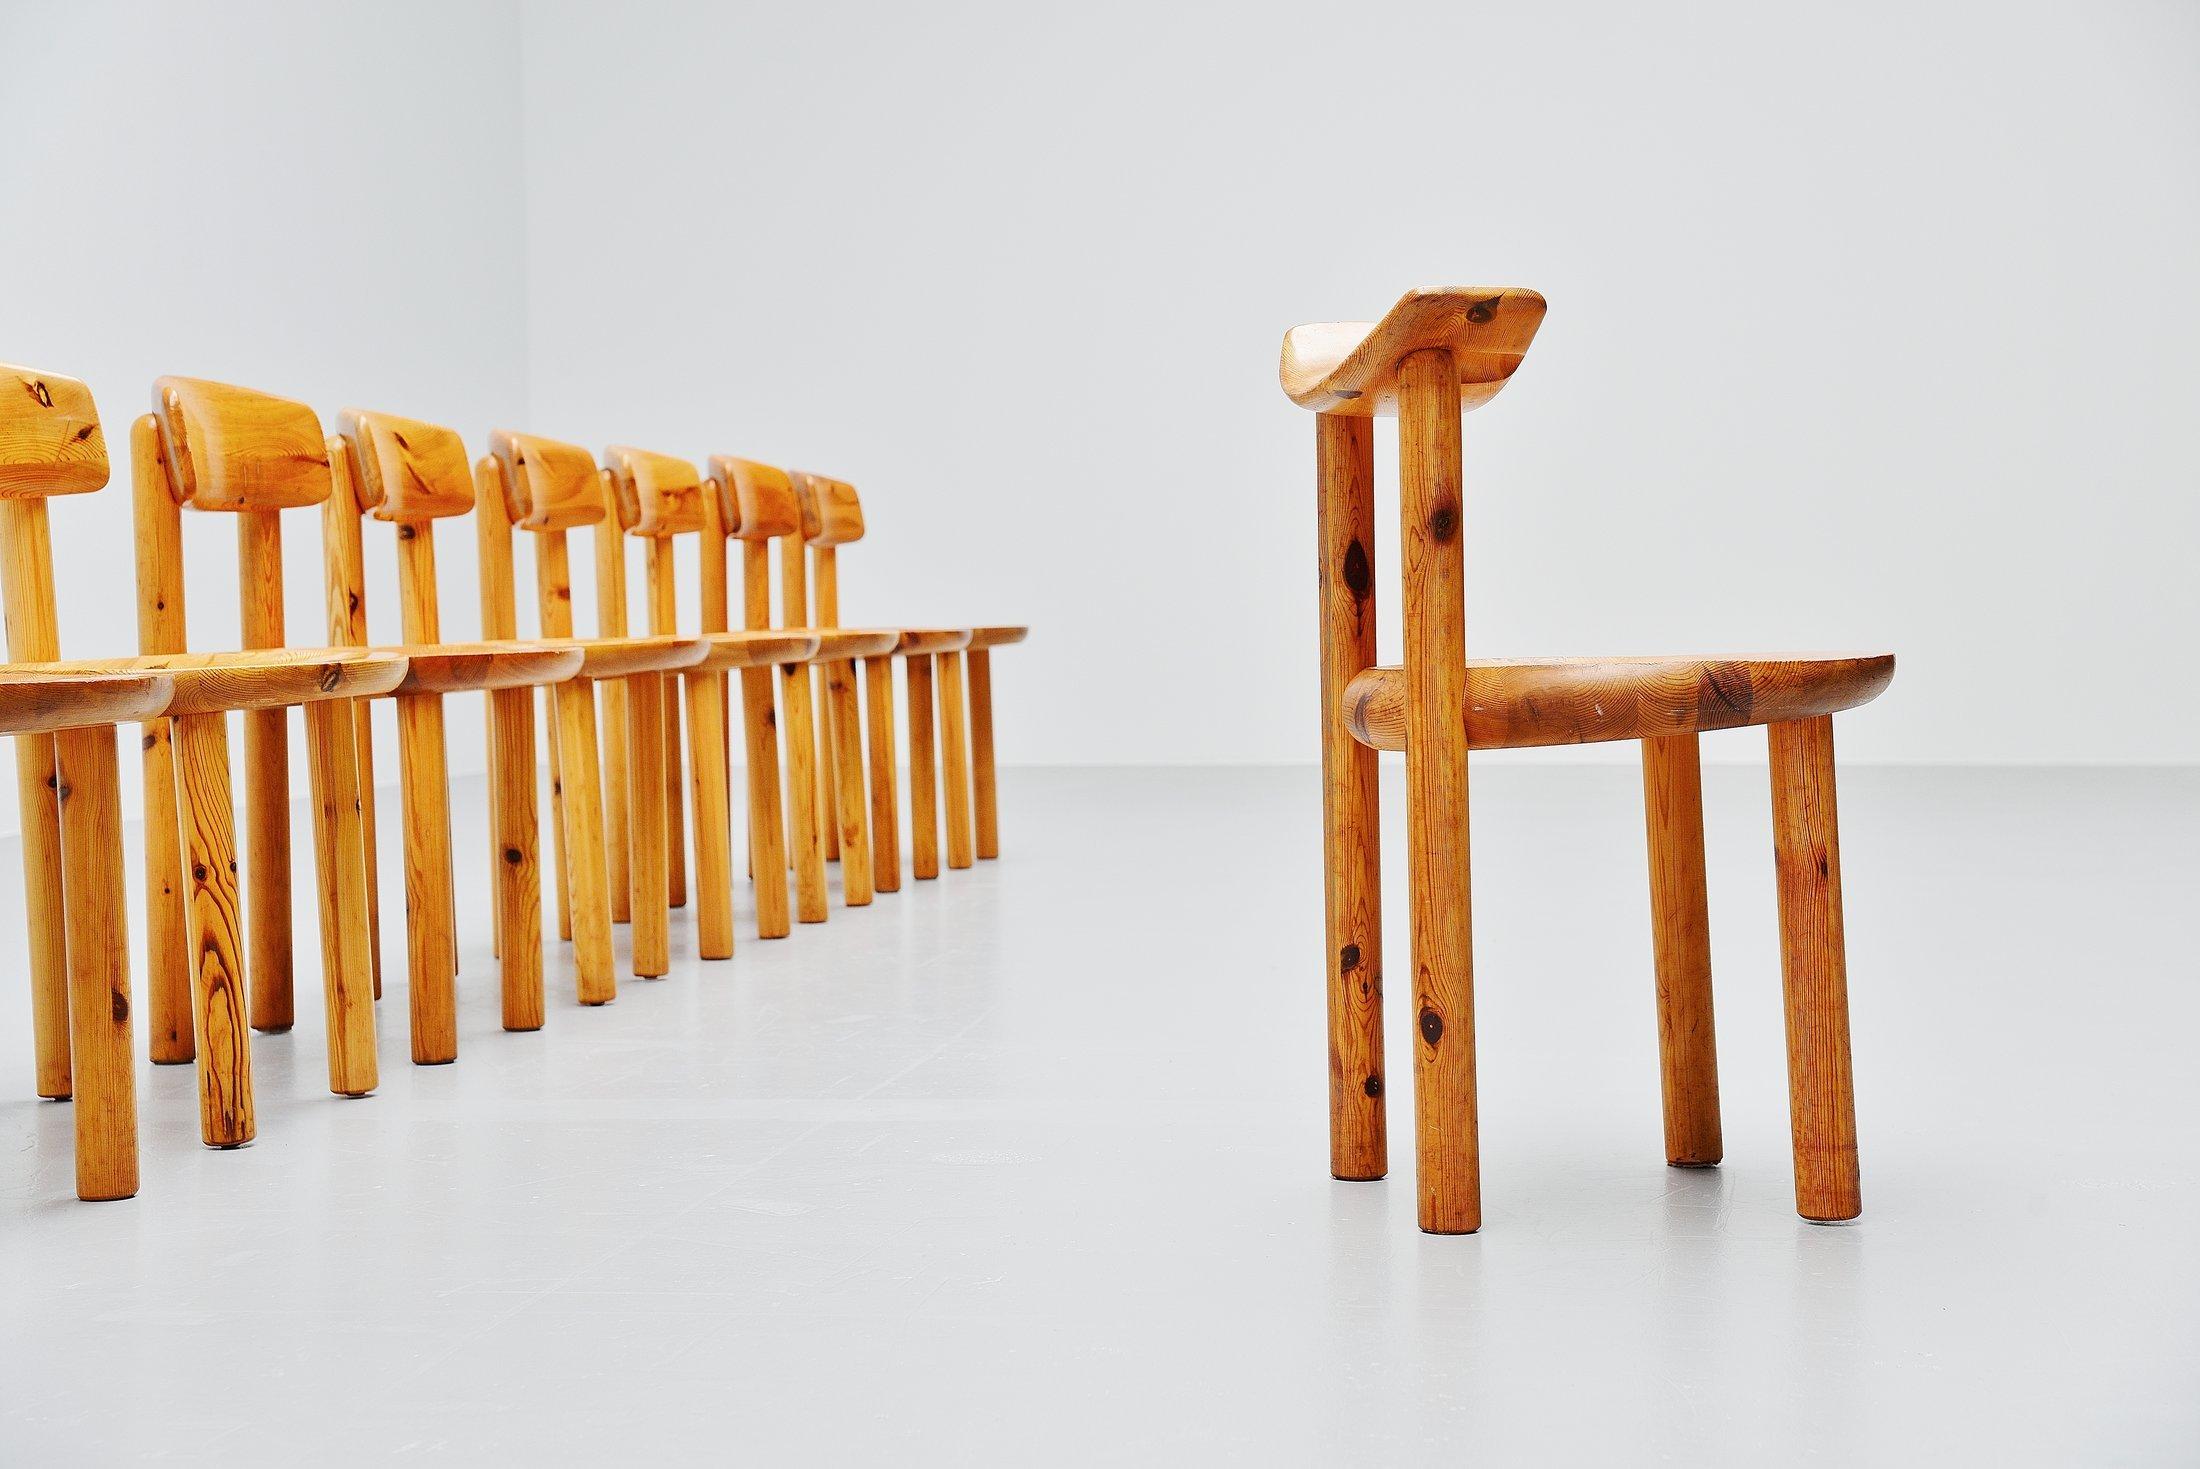 Stunning set of 12 dining chairs designed by Rainer Daumiller and manufactured by Hirtshals Sawmill, Denmark 1970. These chairs are designed by this Danish architect, you can tell right away. The structural detail on these chairs and the moving back